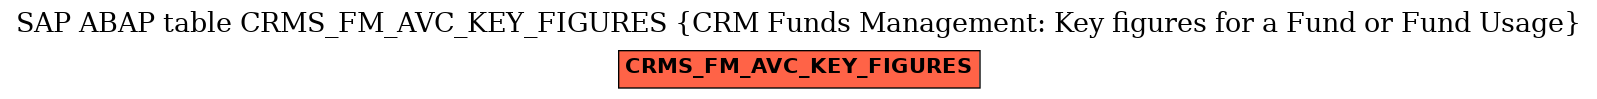 E-R Diagram for table CRMS_FM_AVC_KEY_FIGURES (CRM Funds Management: Key figures for a Fund or Fund Usage)